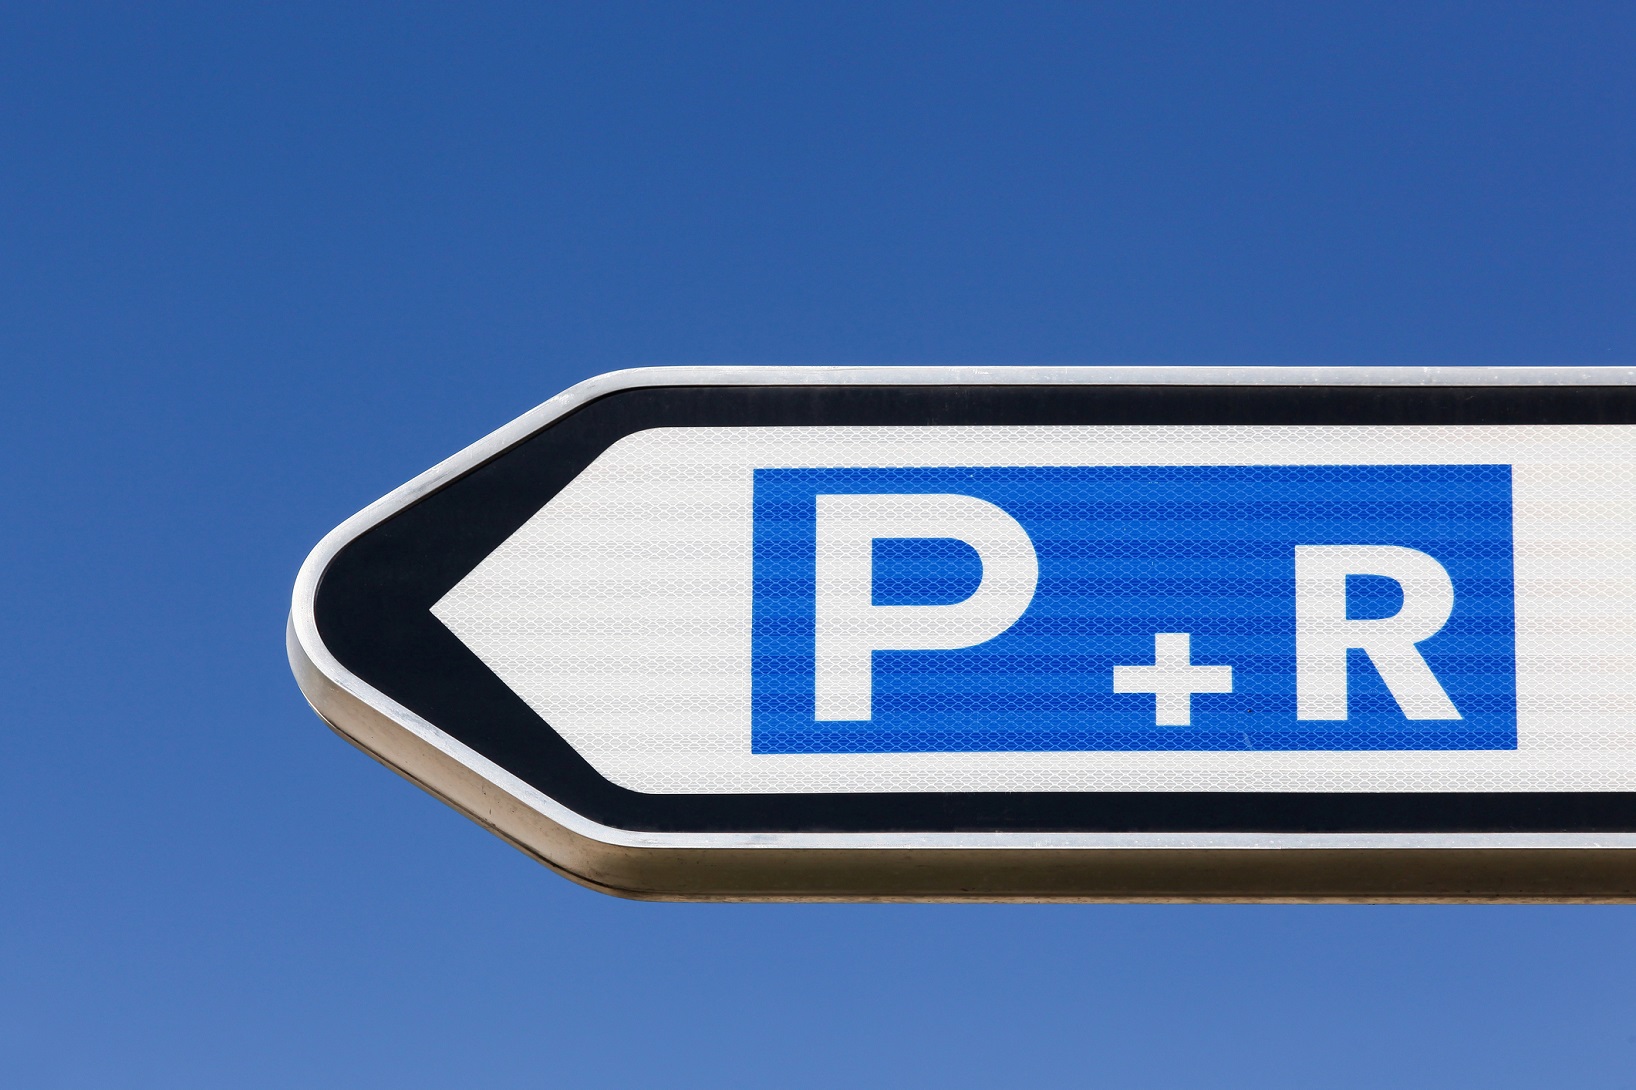 Park and Ride car Park sign